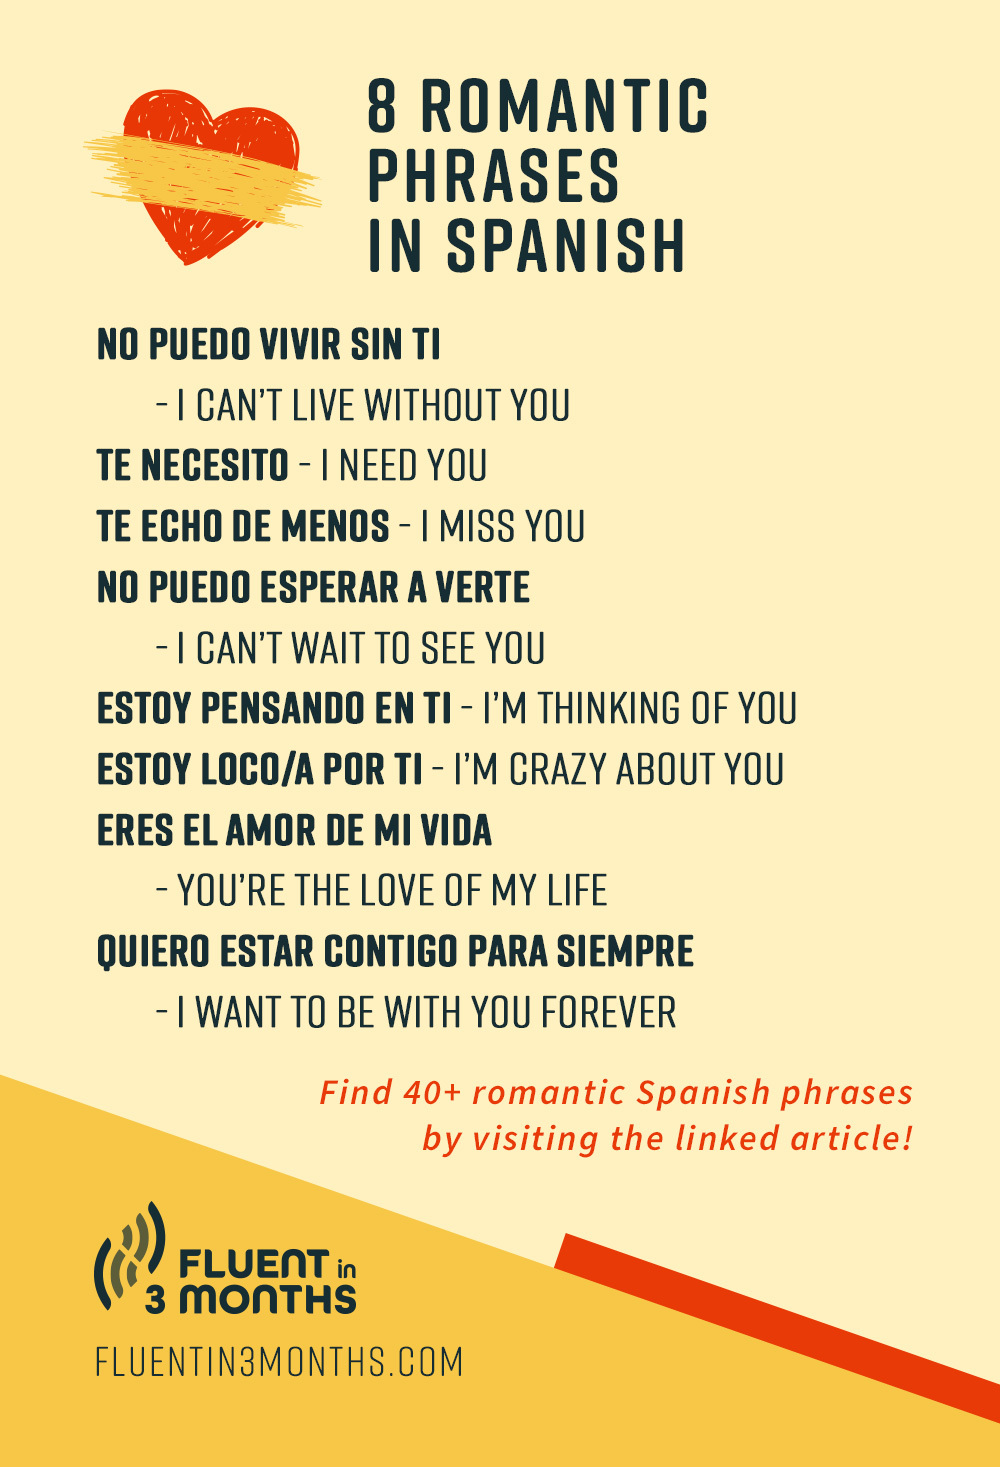 i love you in spanish quotes